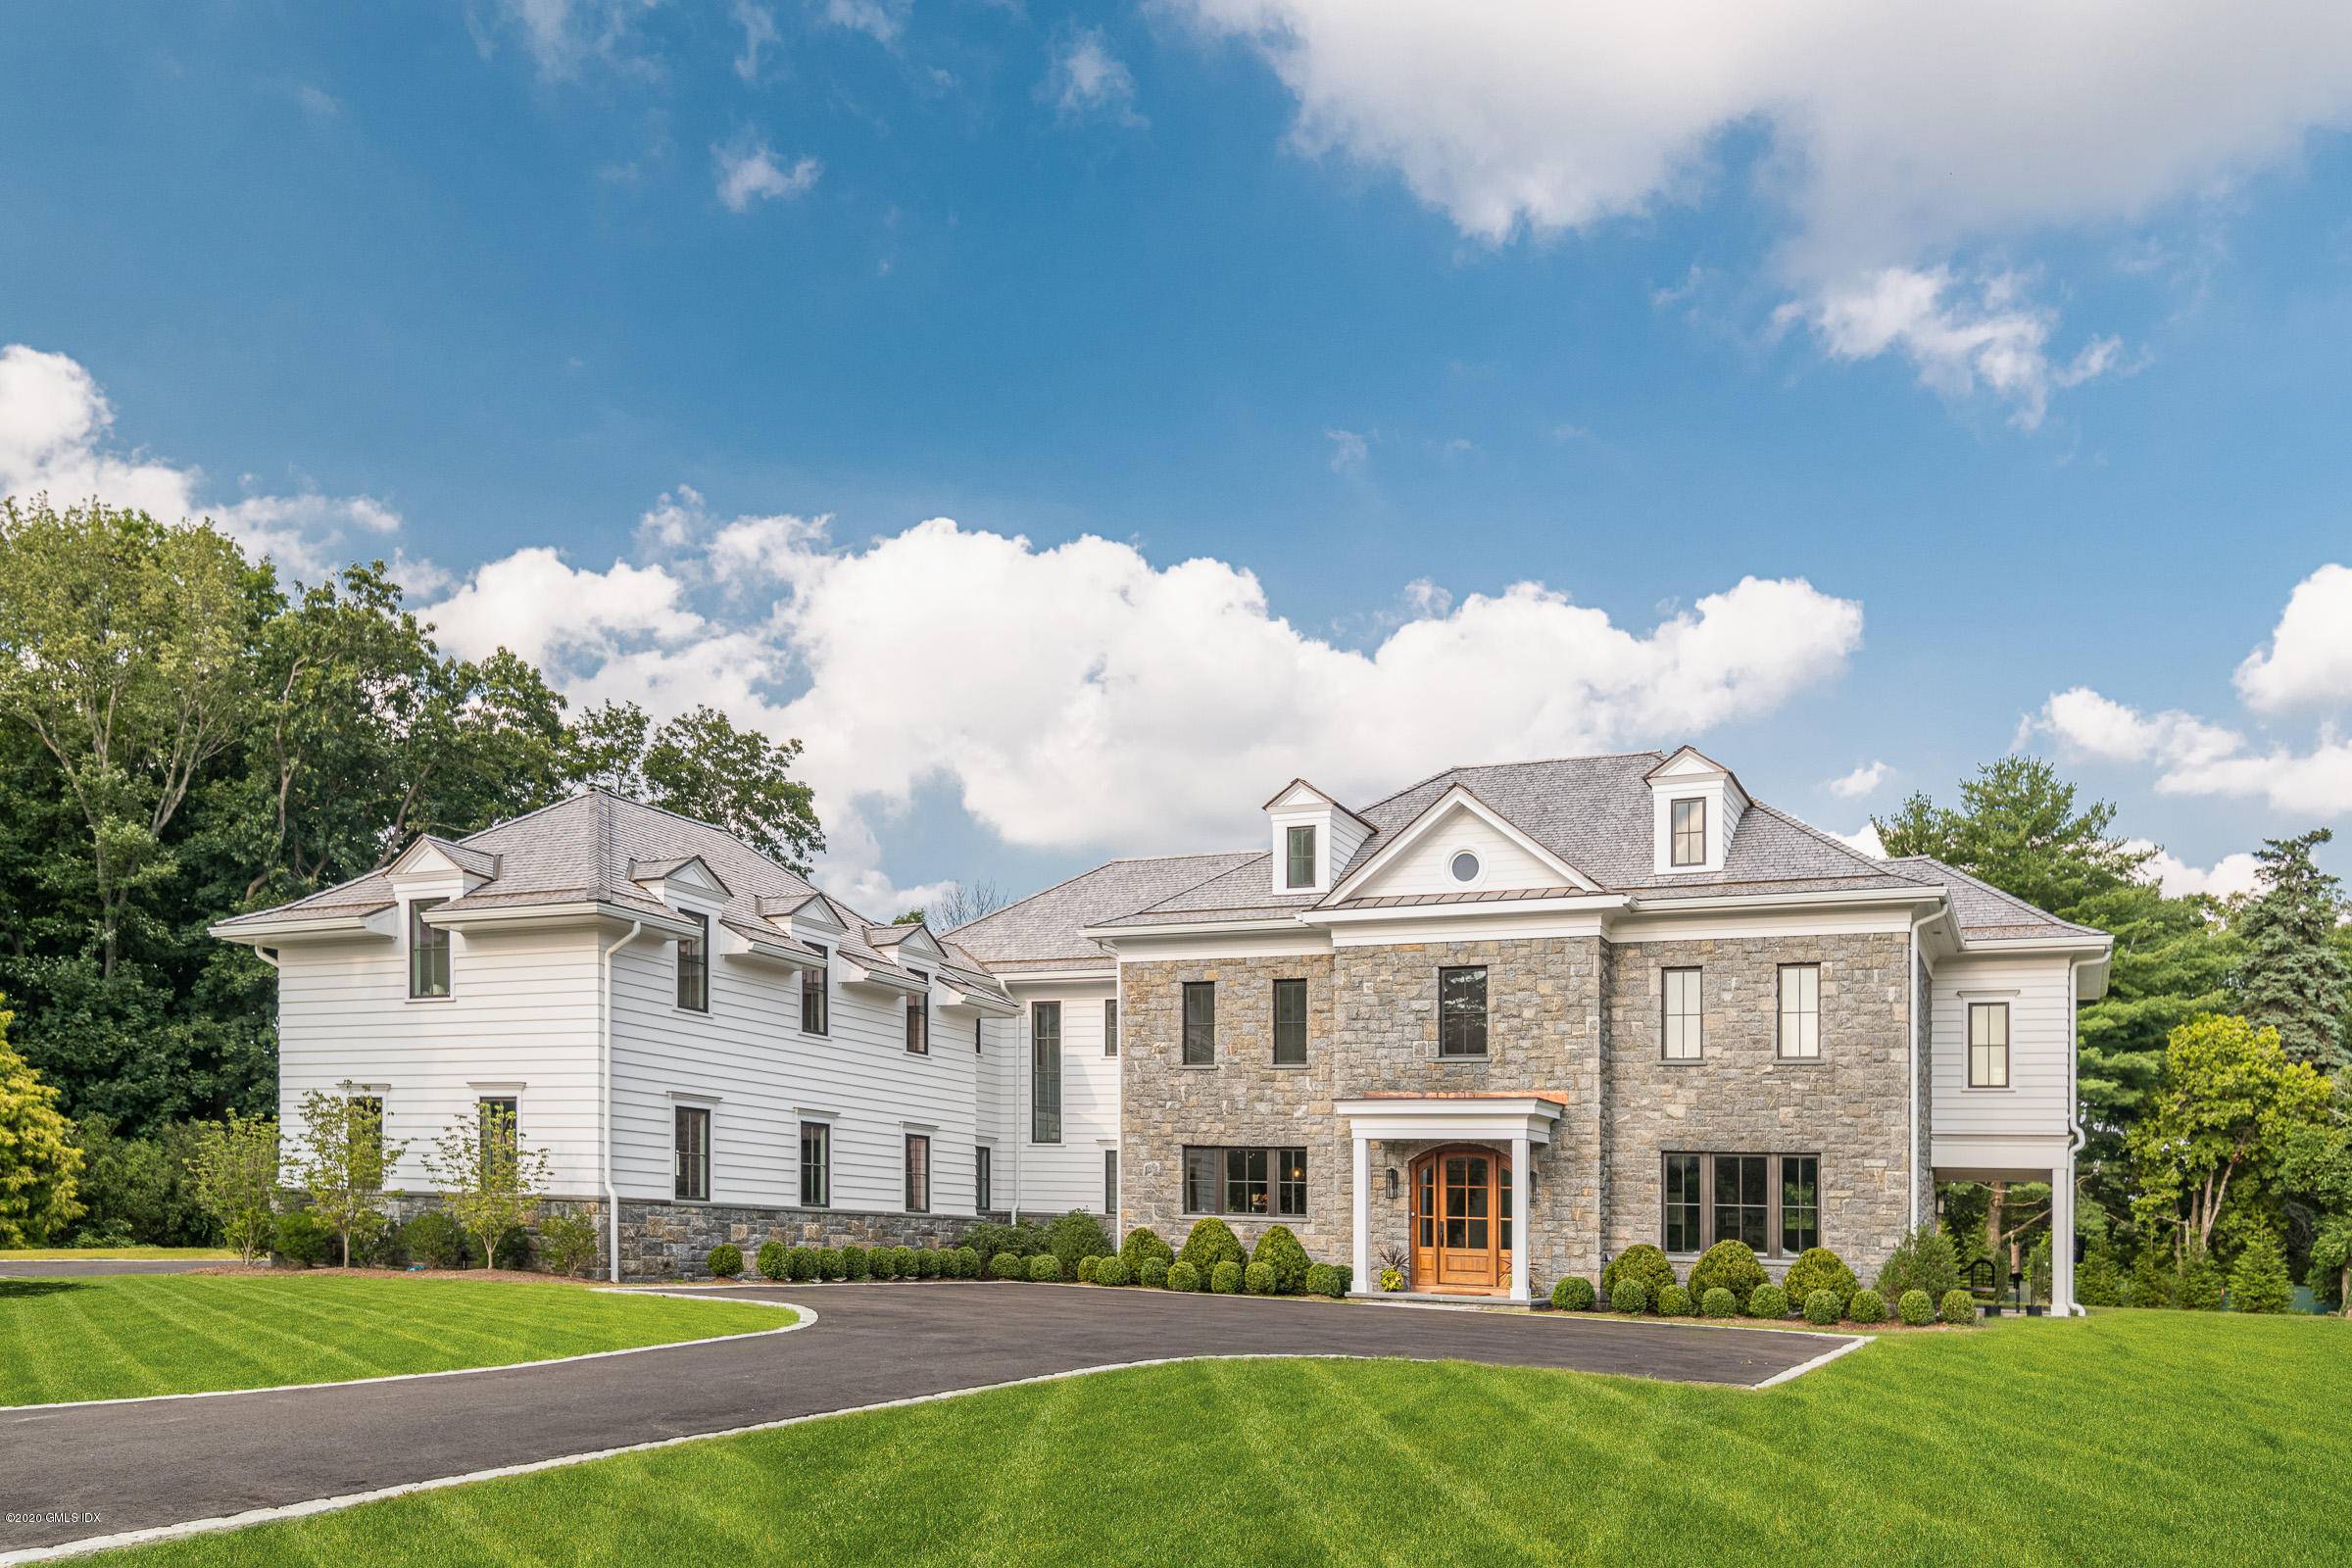 Nestled on a two acre private lot, the drive up to this stunning almost 9000 square foot Connecticut estate is picturesque, a homeowner's dream.